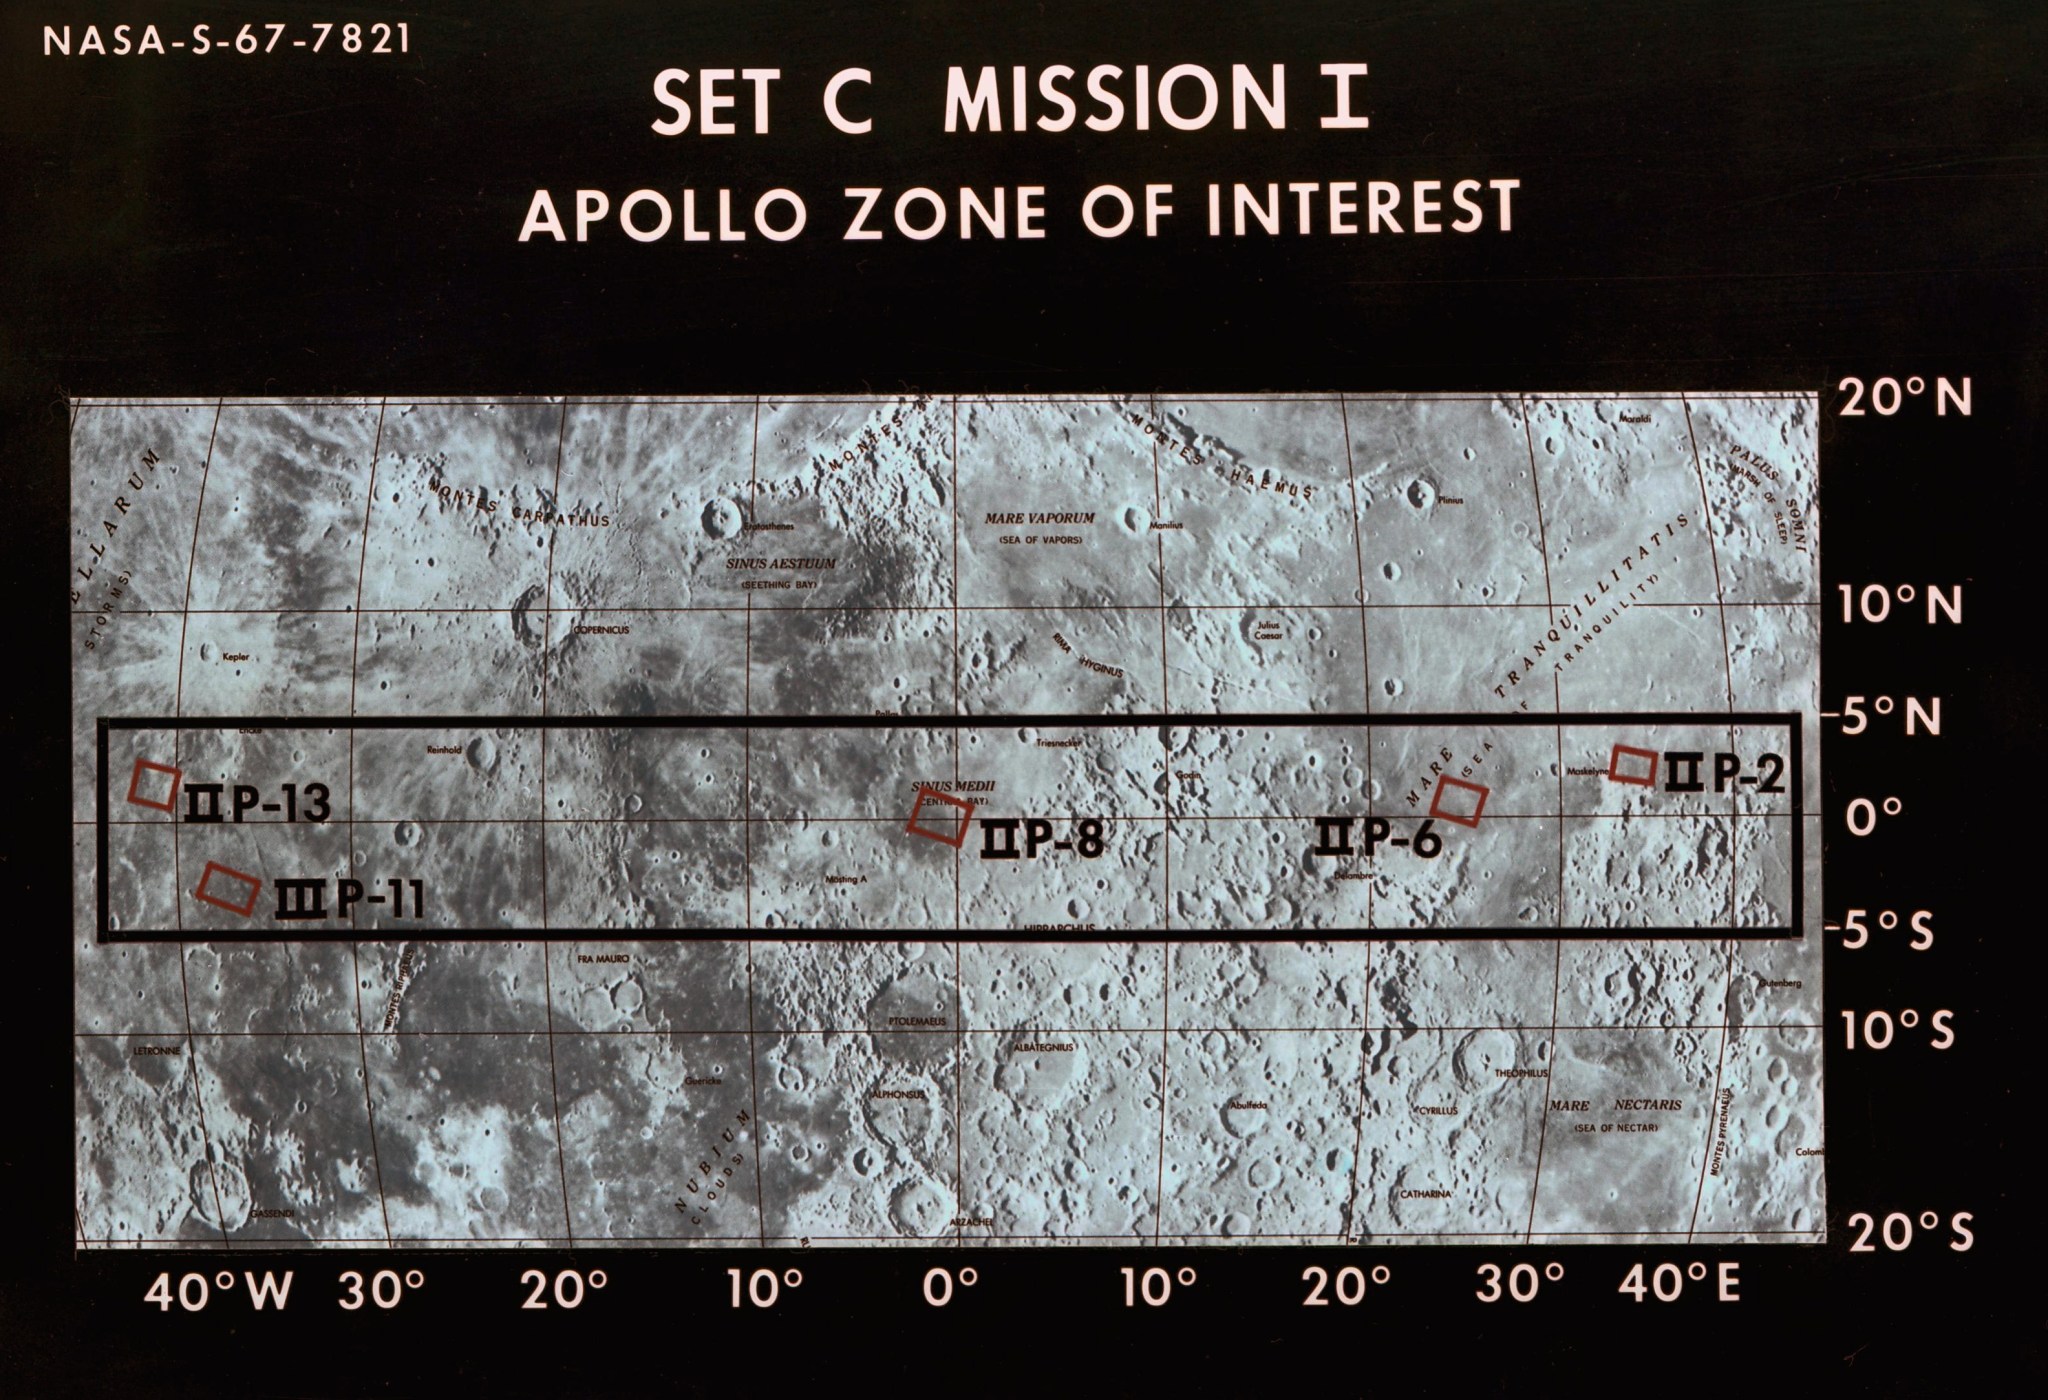 Close-up of the landing sites within the Apollo Zone of Interest.